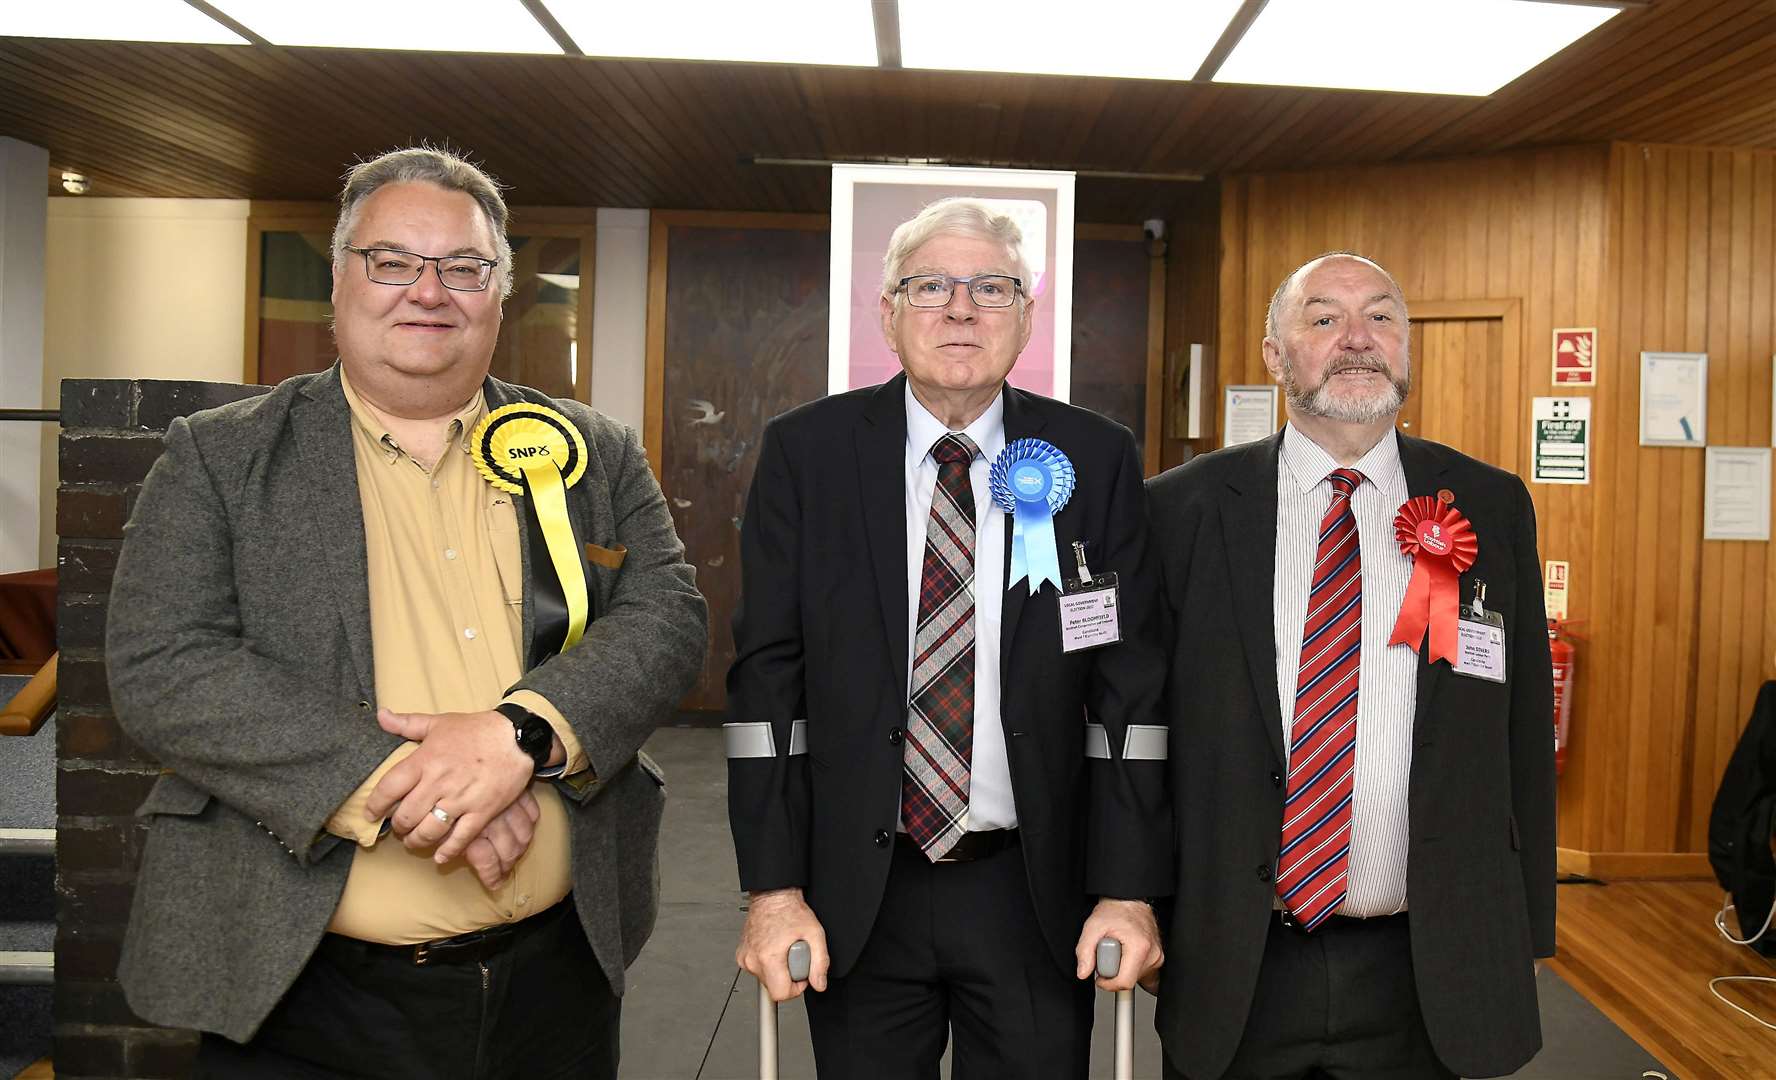 SNP joint leader Graham Leadbitter (left) and Labour group leader John Divers (right), who have both signed the open letter, either side of Conservative Peter Bloomfield at the election count in May.